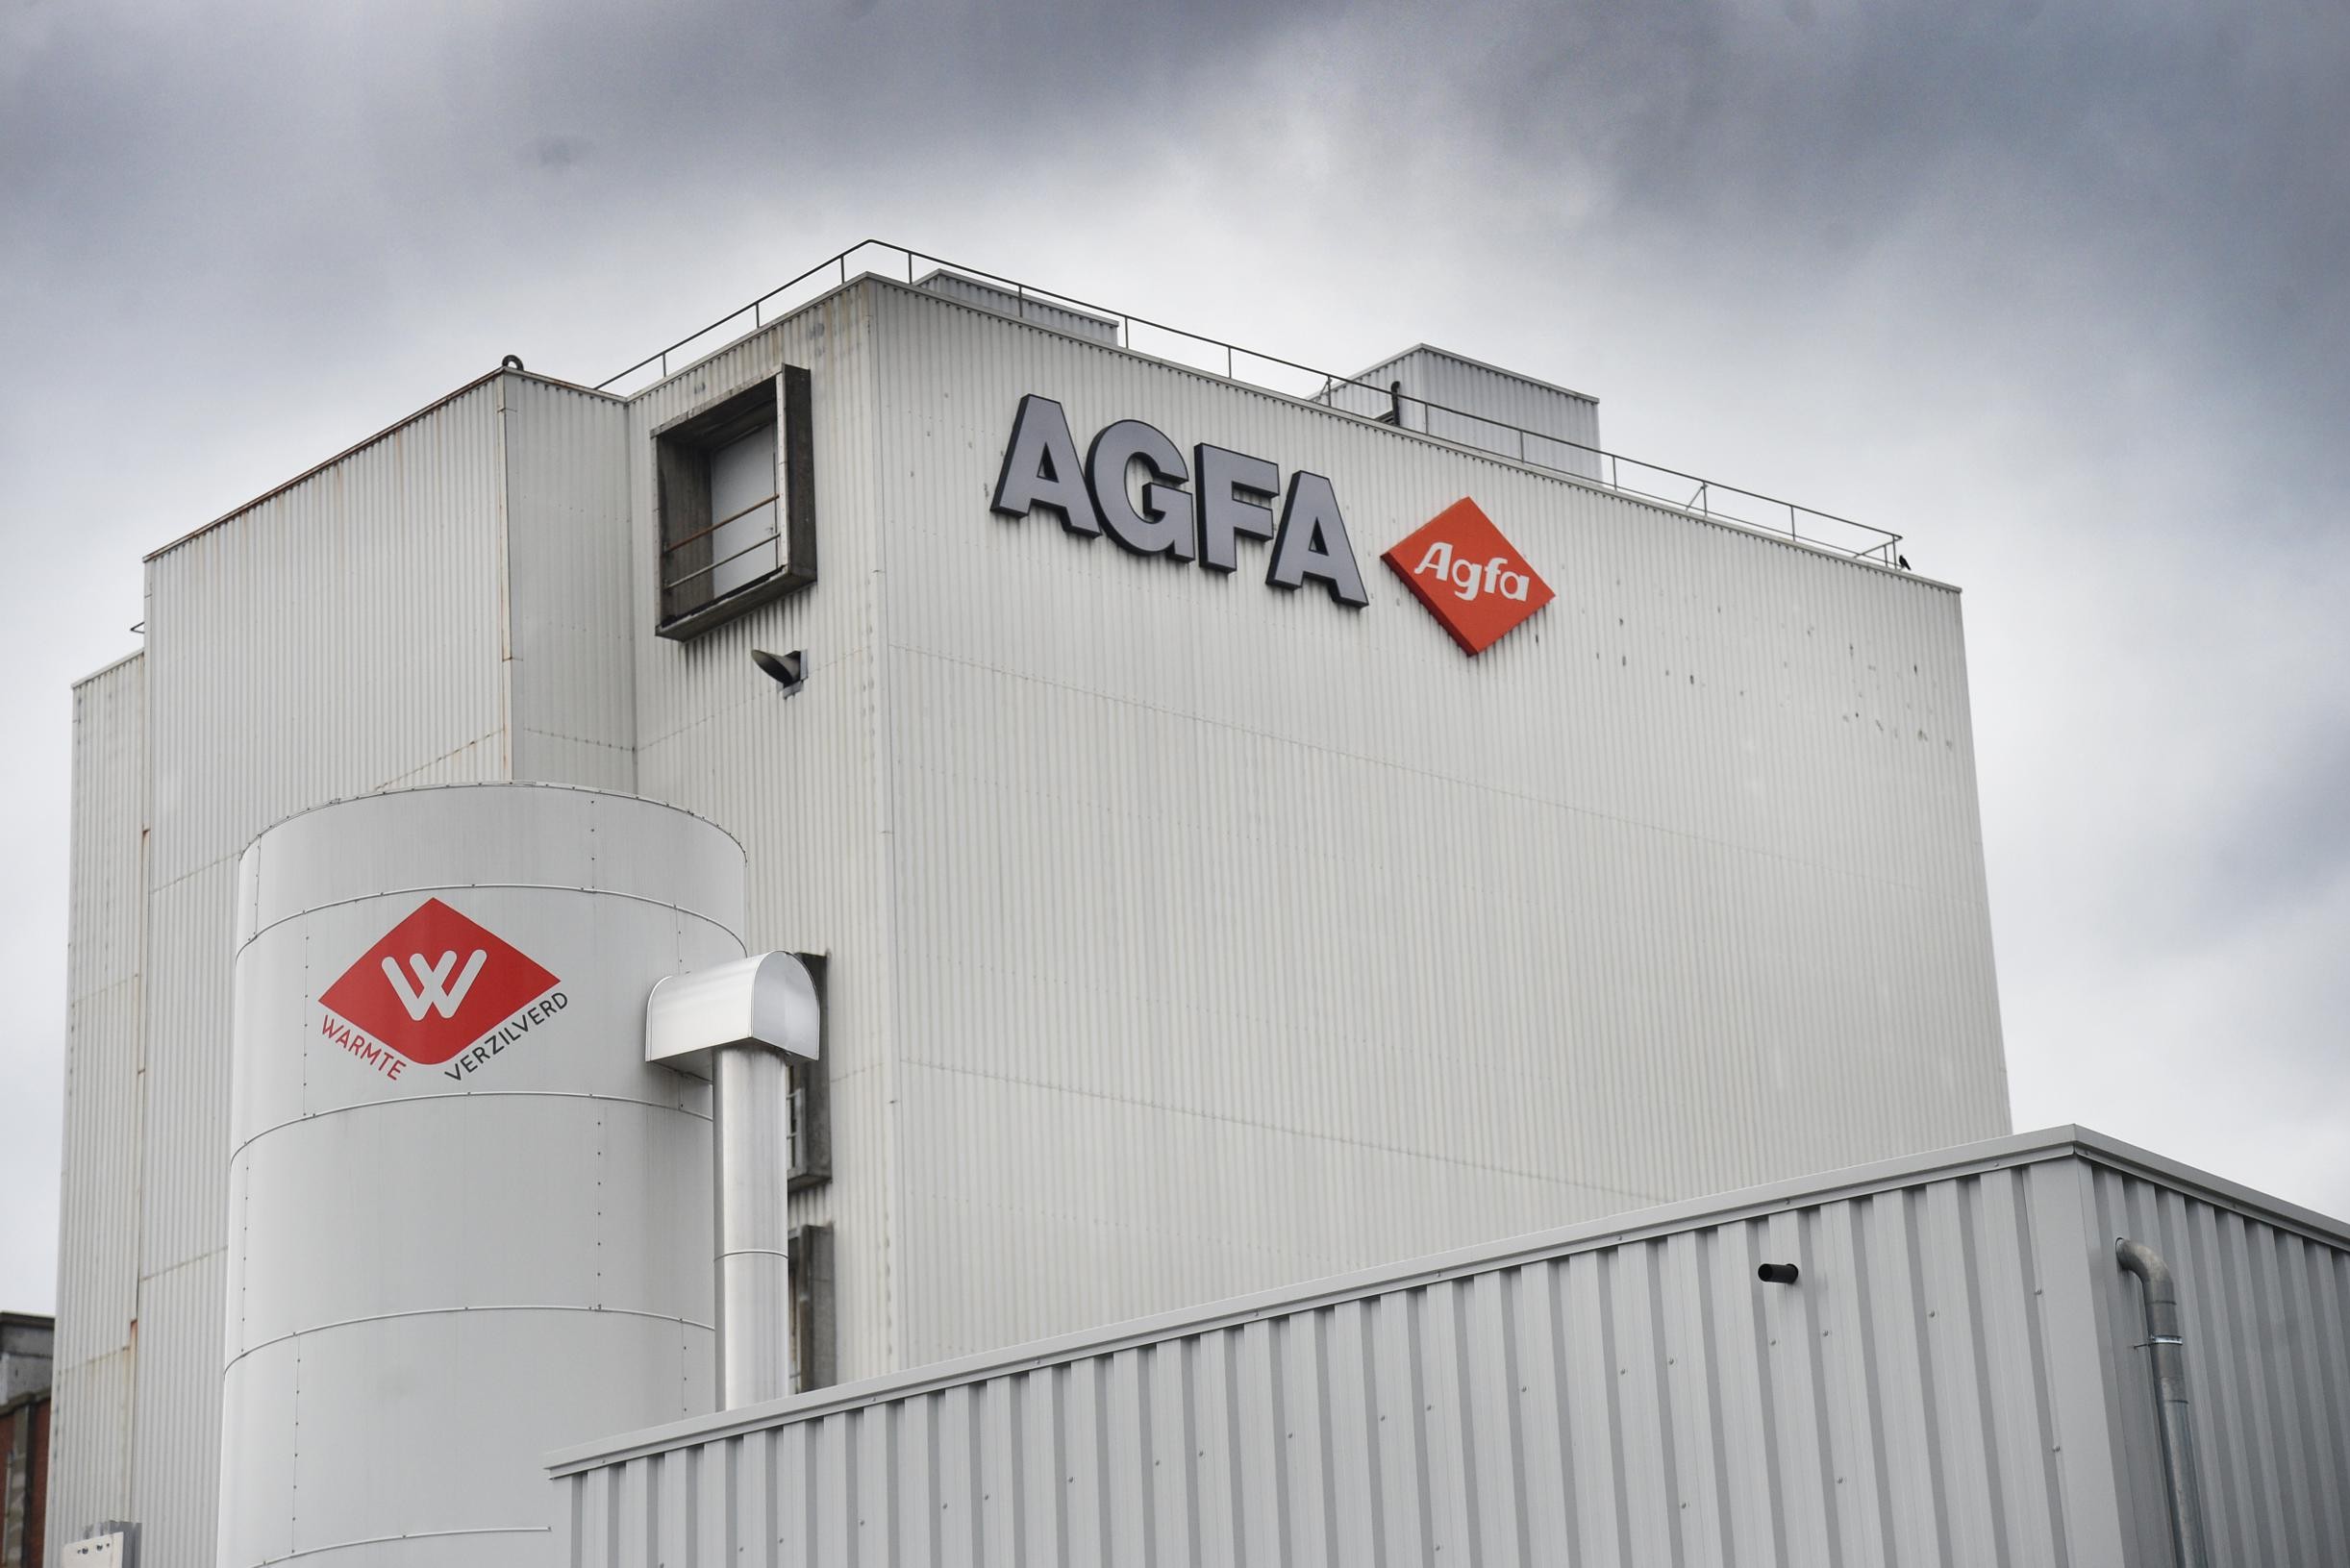 Sale of Agfa printing plate division: “187 employees involved in Belgium”